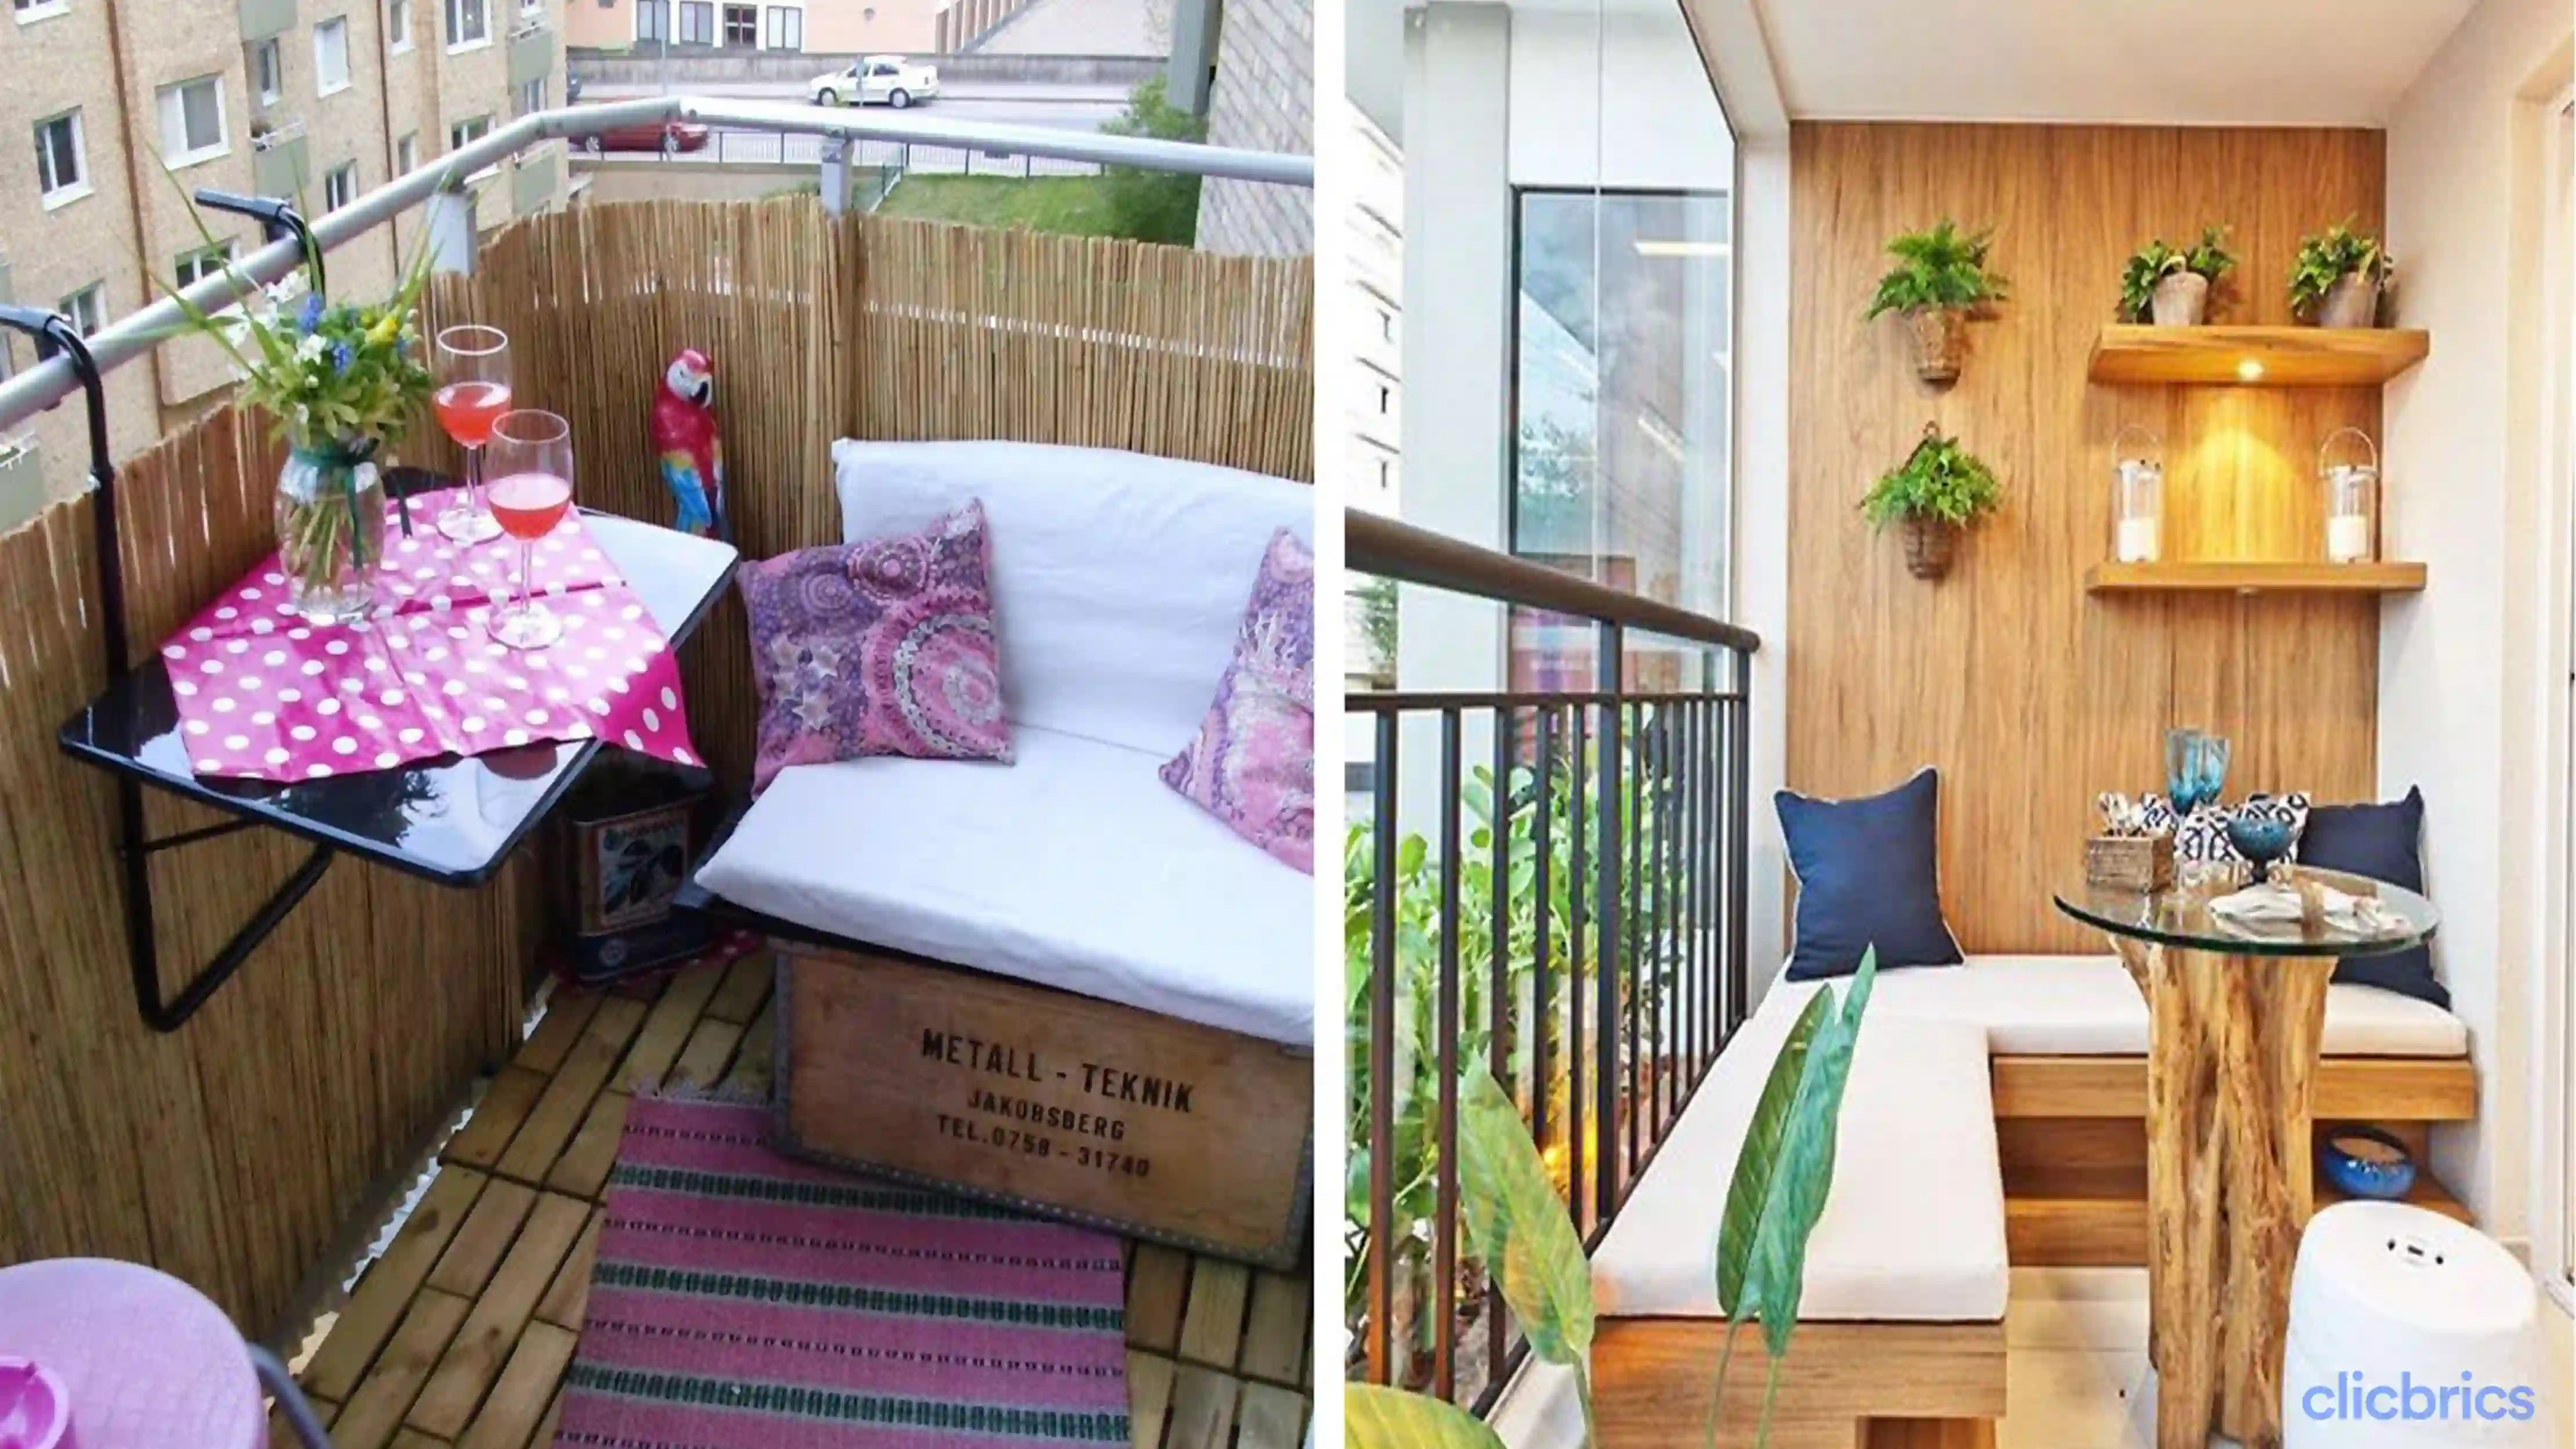 9 Unique Ways to Decorate Your Small Balcony (With Pictures) -2022